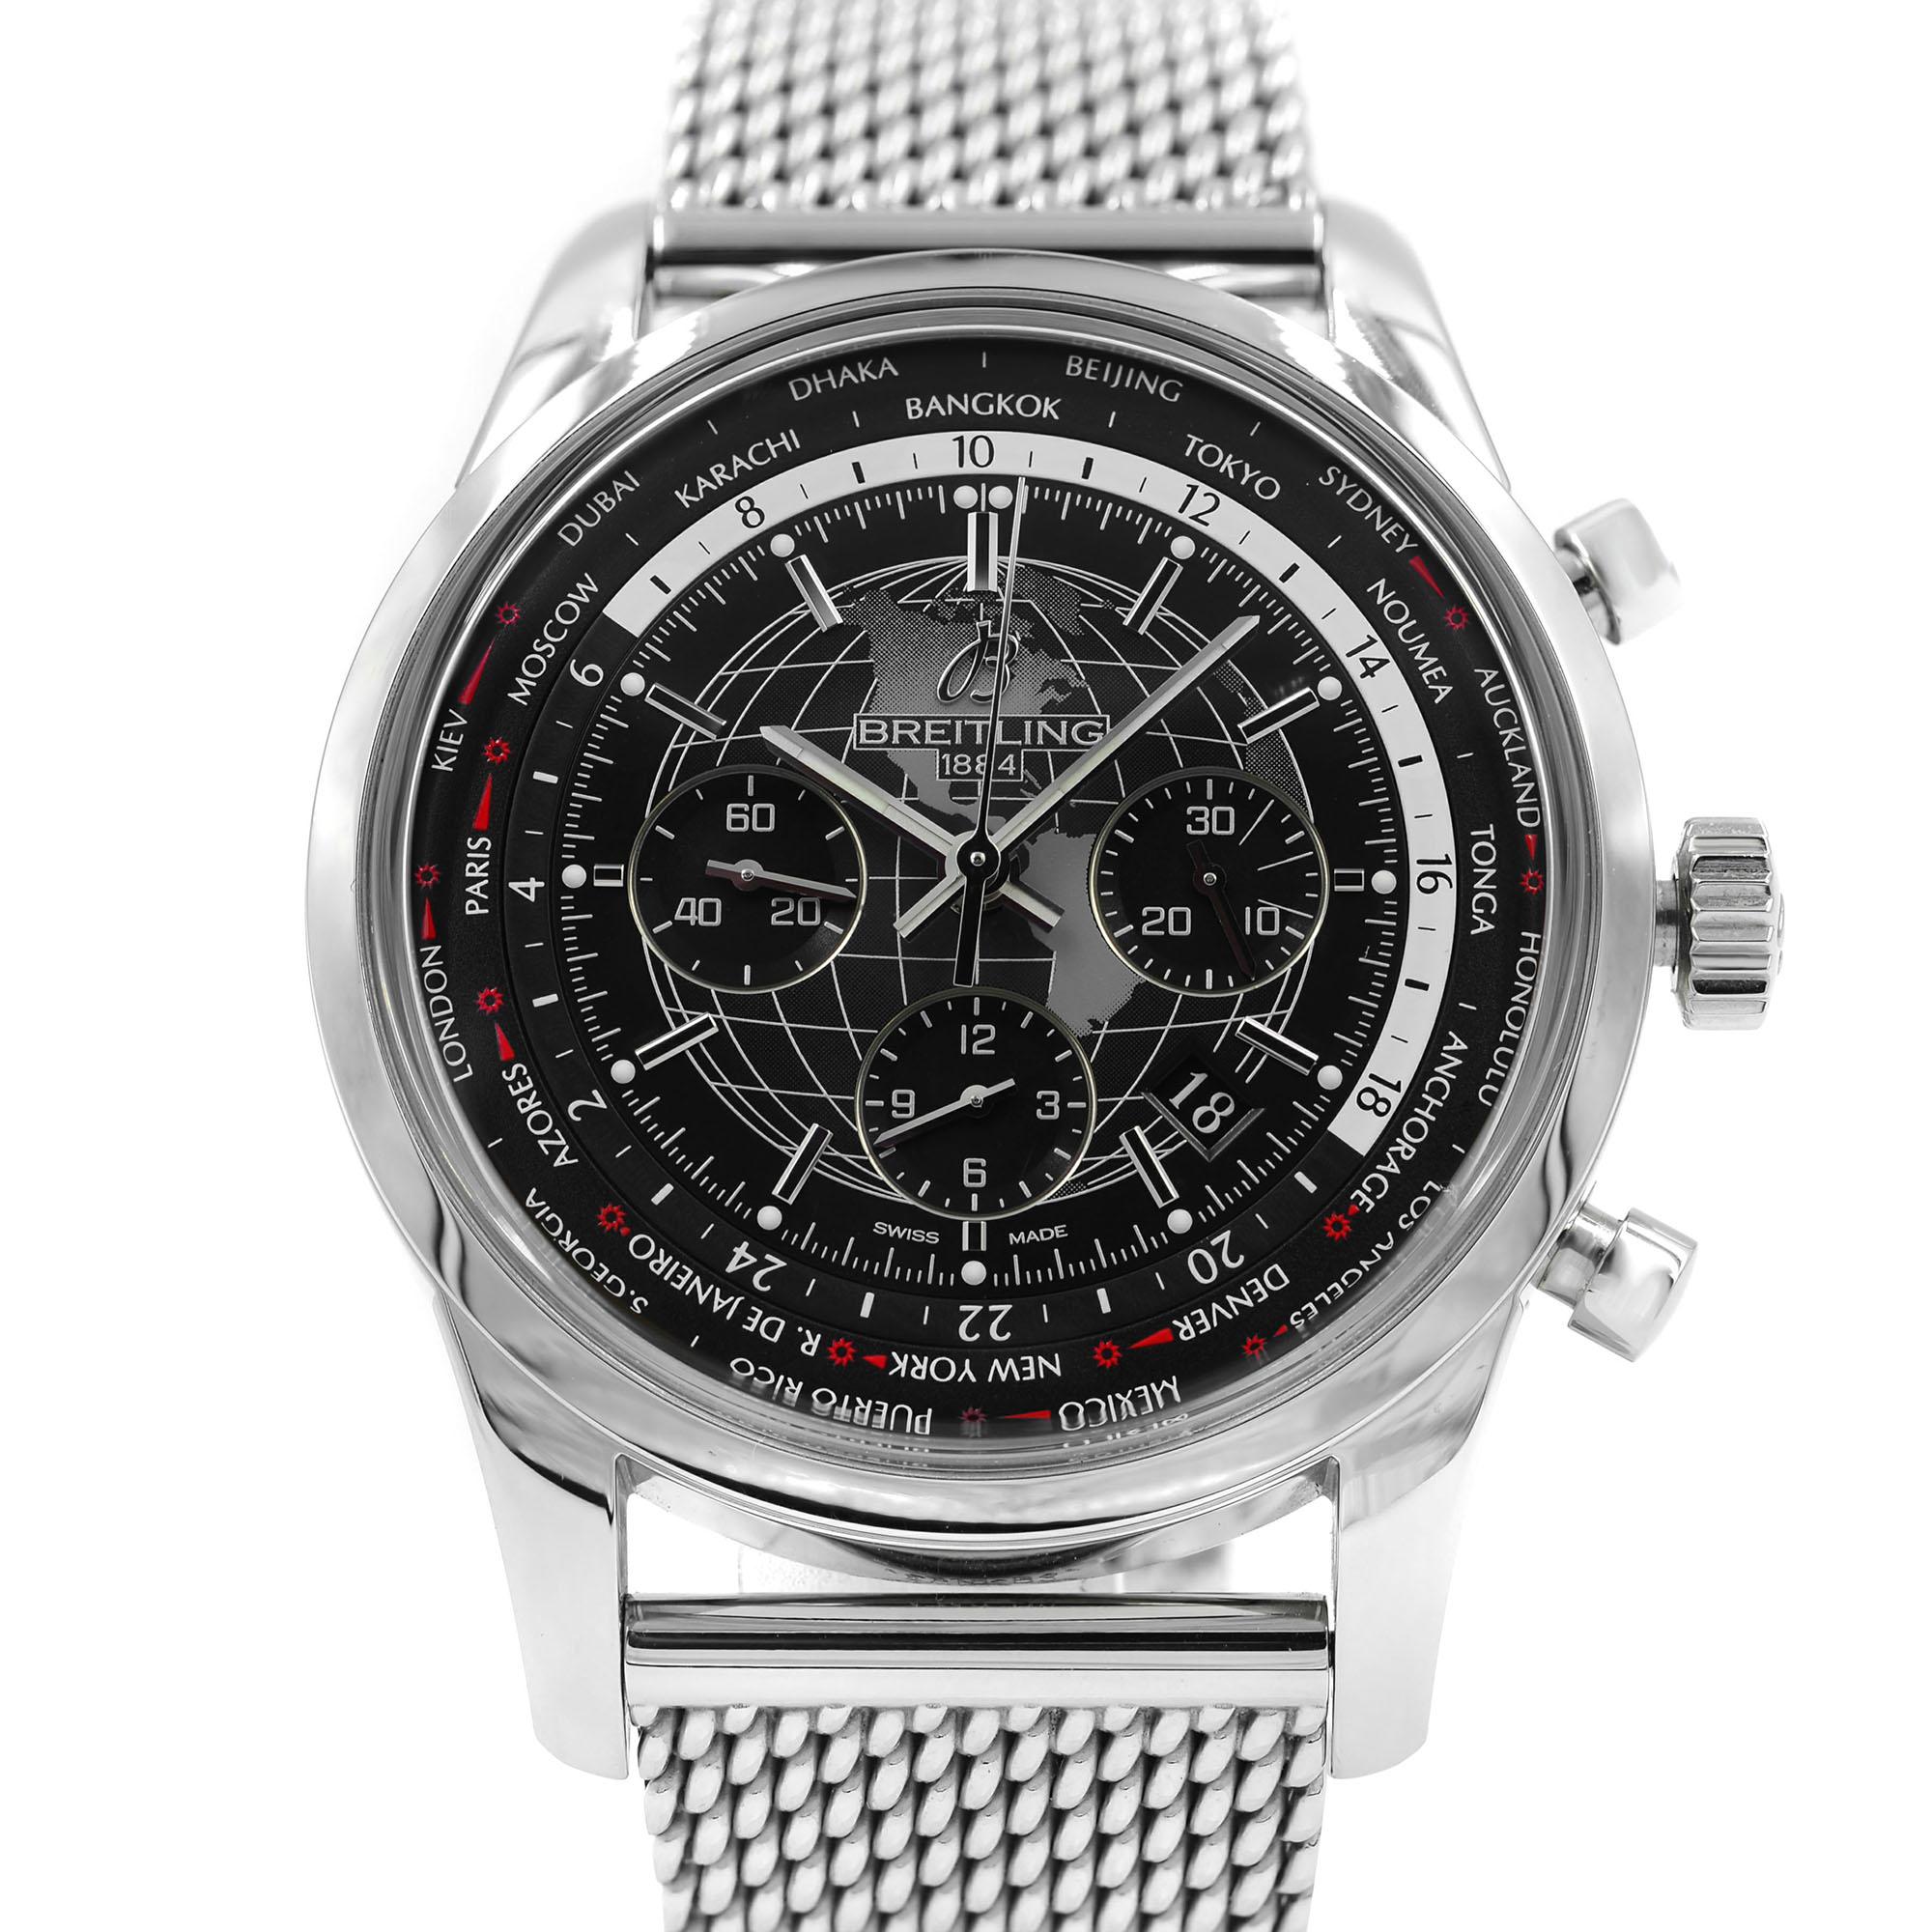 This display model Breitling Transocean  AB0510U4/BE84-152A is a beautiful men's timepiece that is powered by an automatic movement which is cased in a stainless steel case. It has a round shape face, chronograph, date, dual time, multiple time